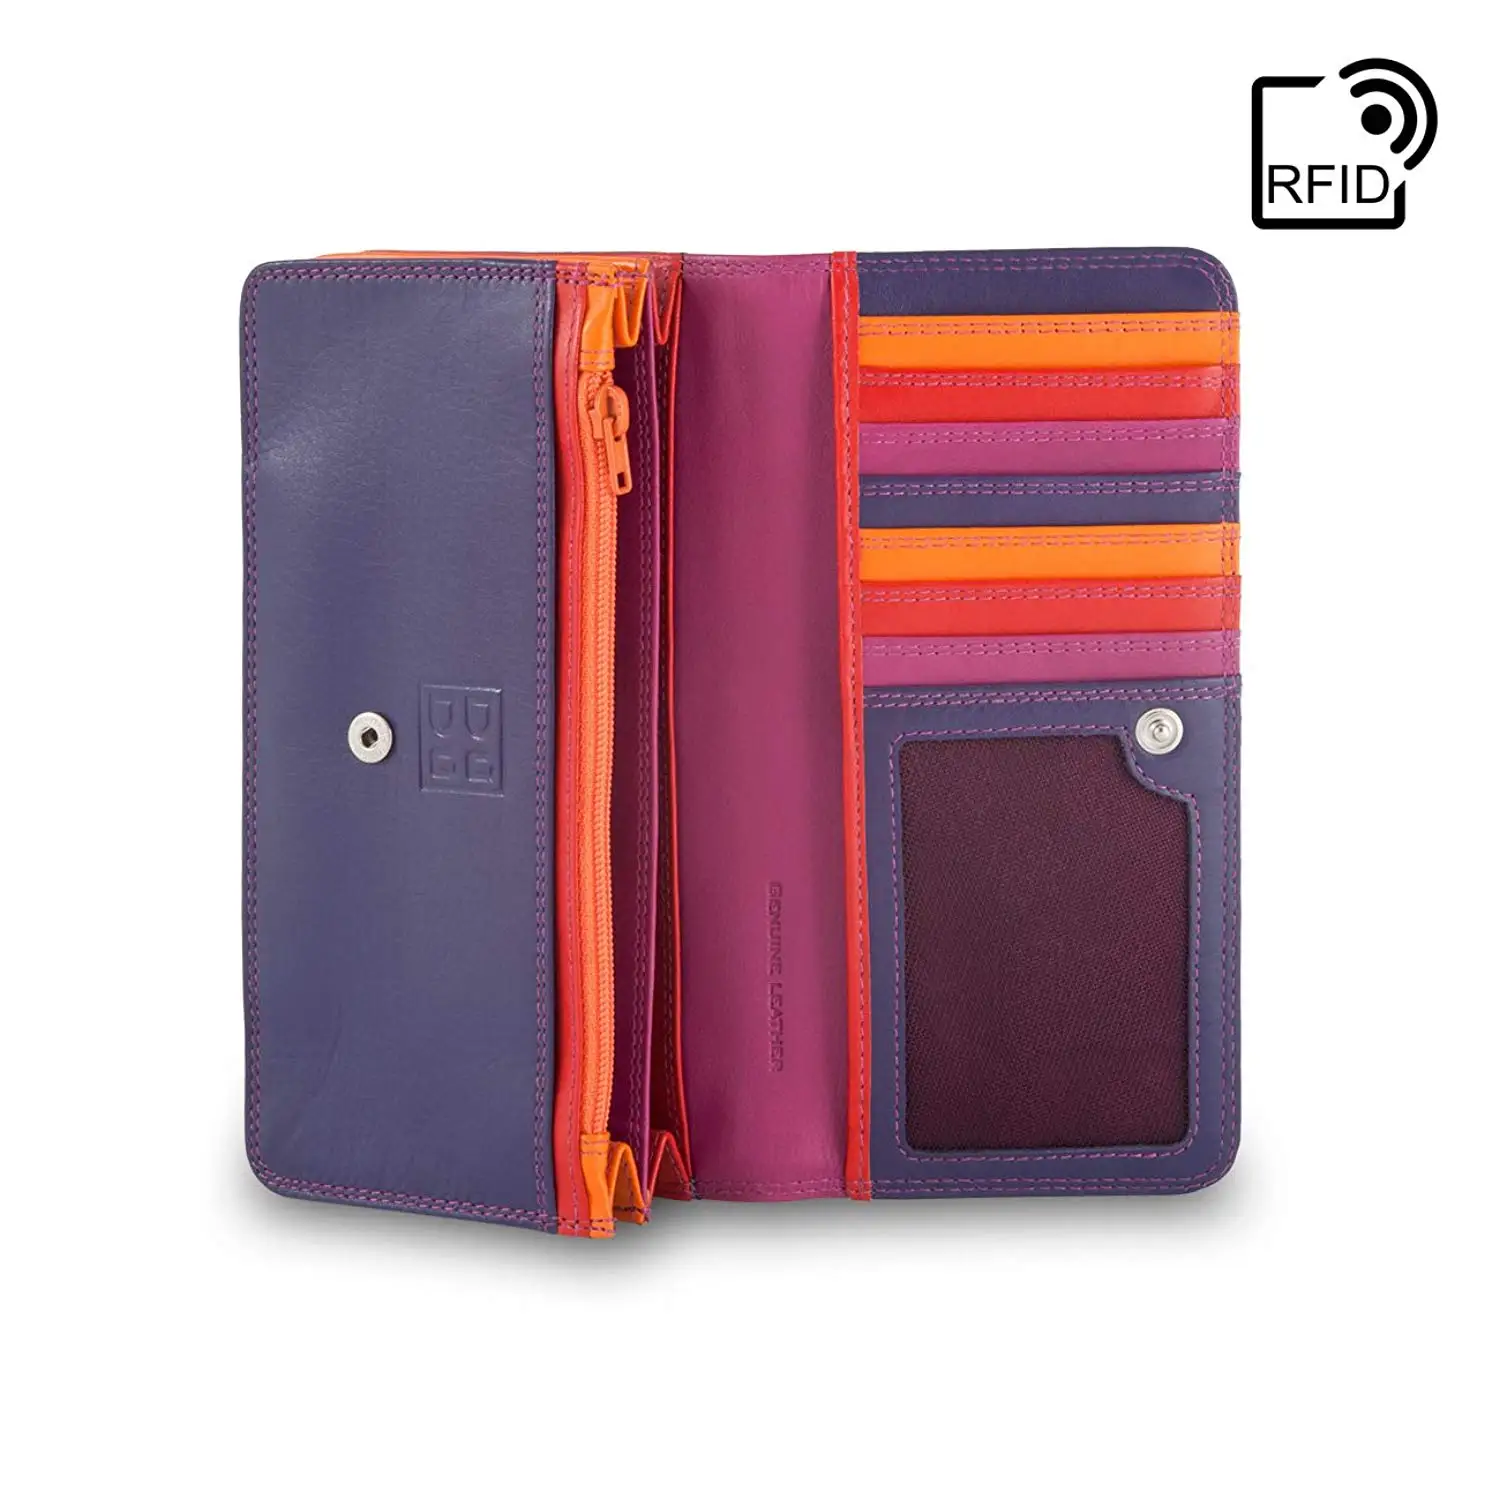 Buy DUDU RFID Blocking Womens Leather Purse Ladies Wallet Multicolor with Coin pocket and Snap ...